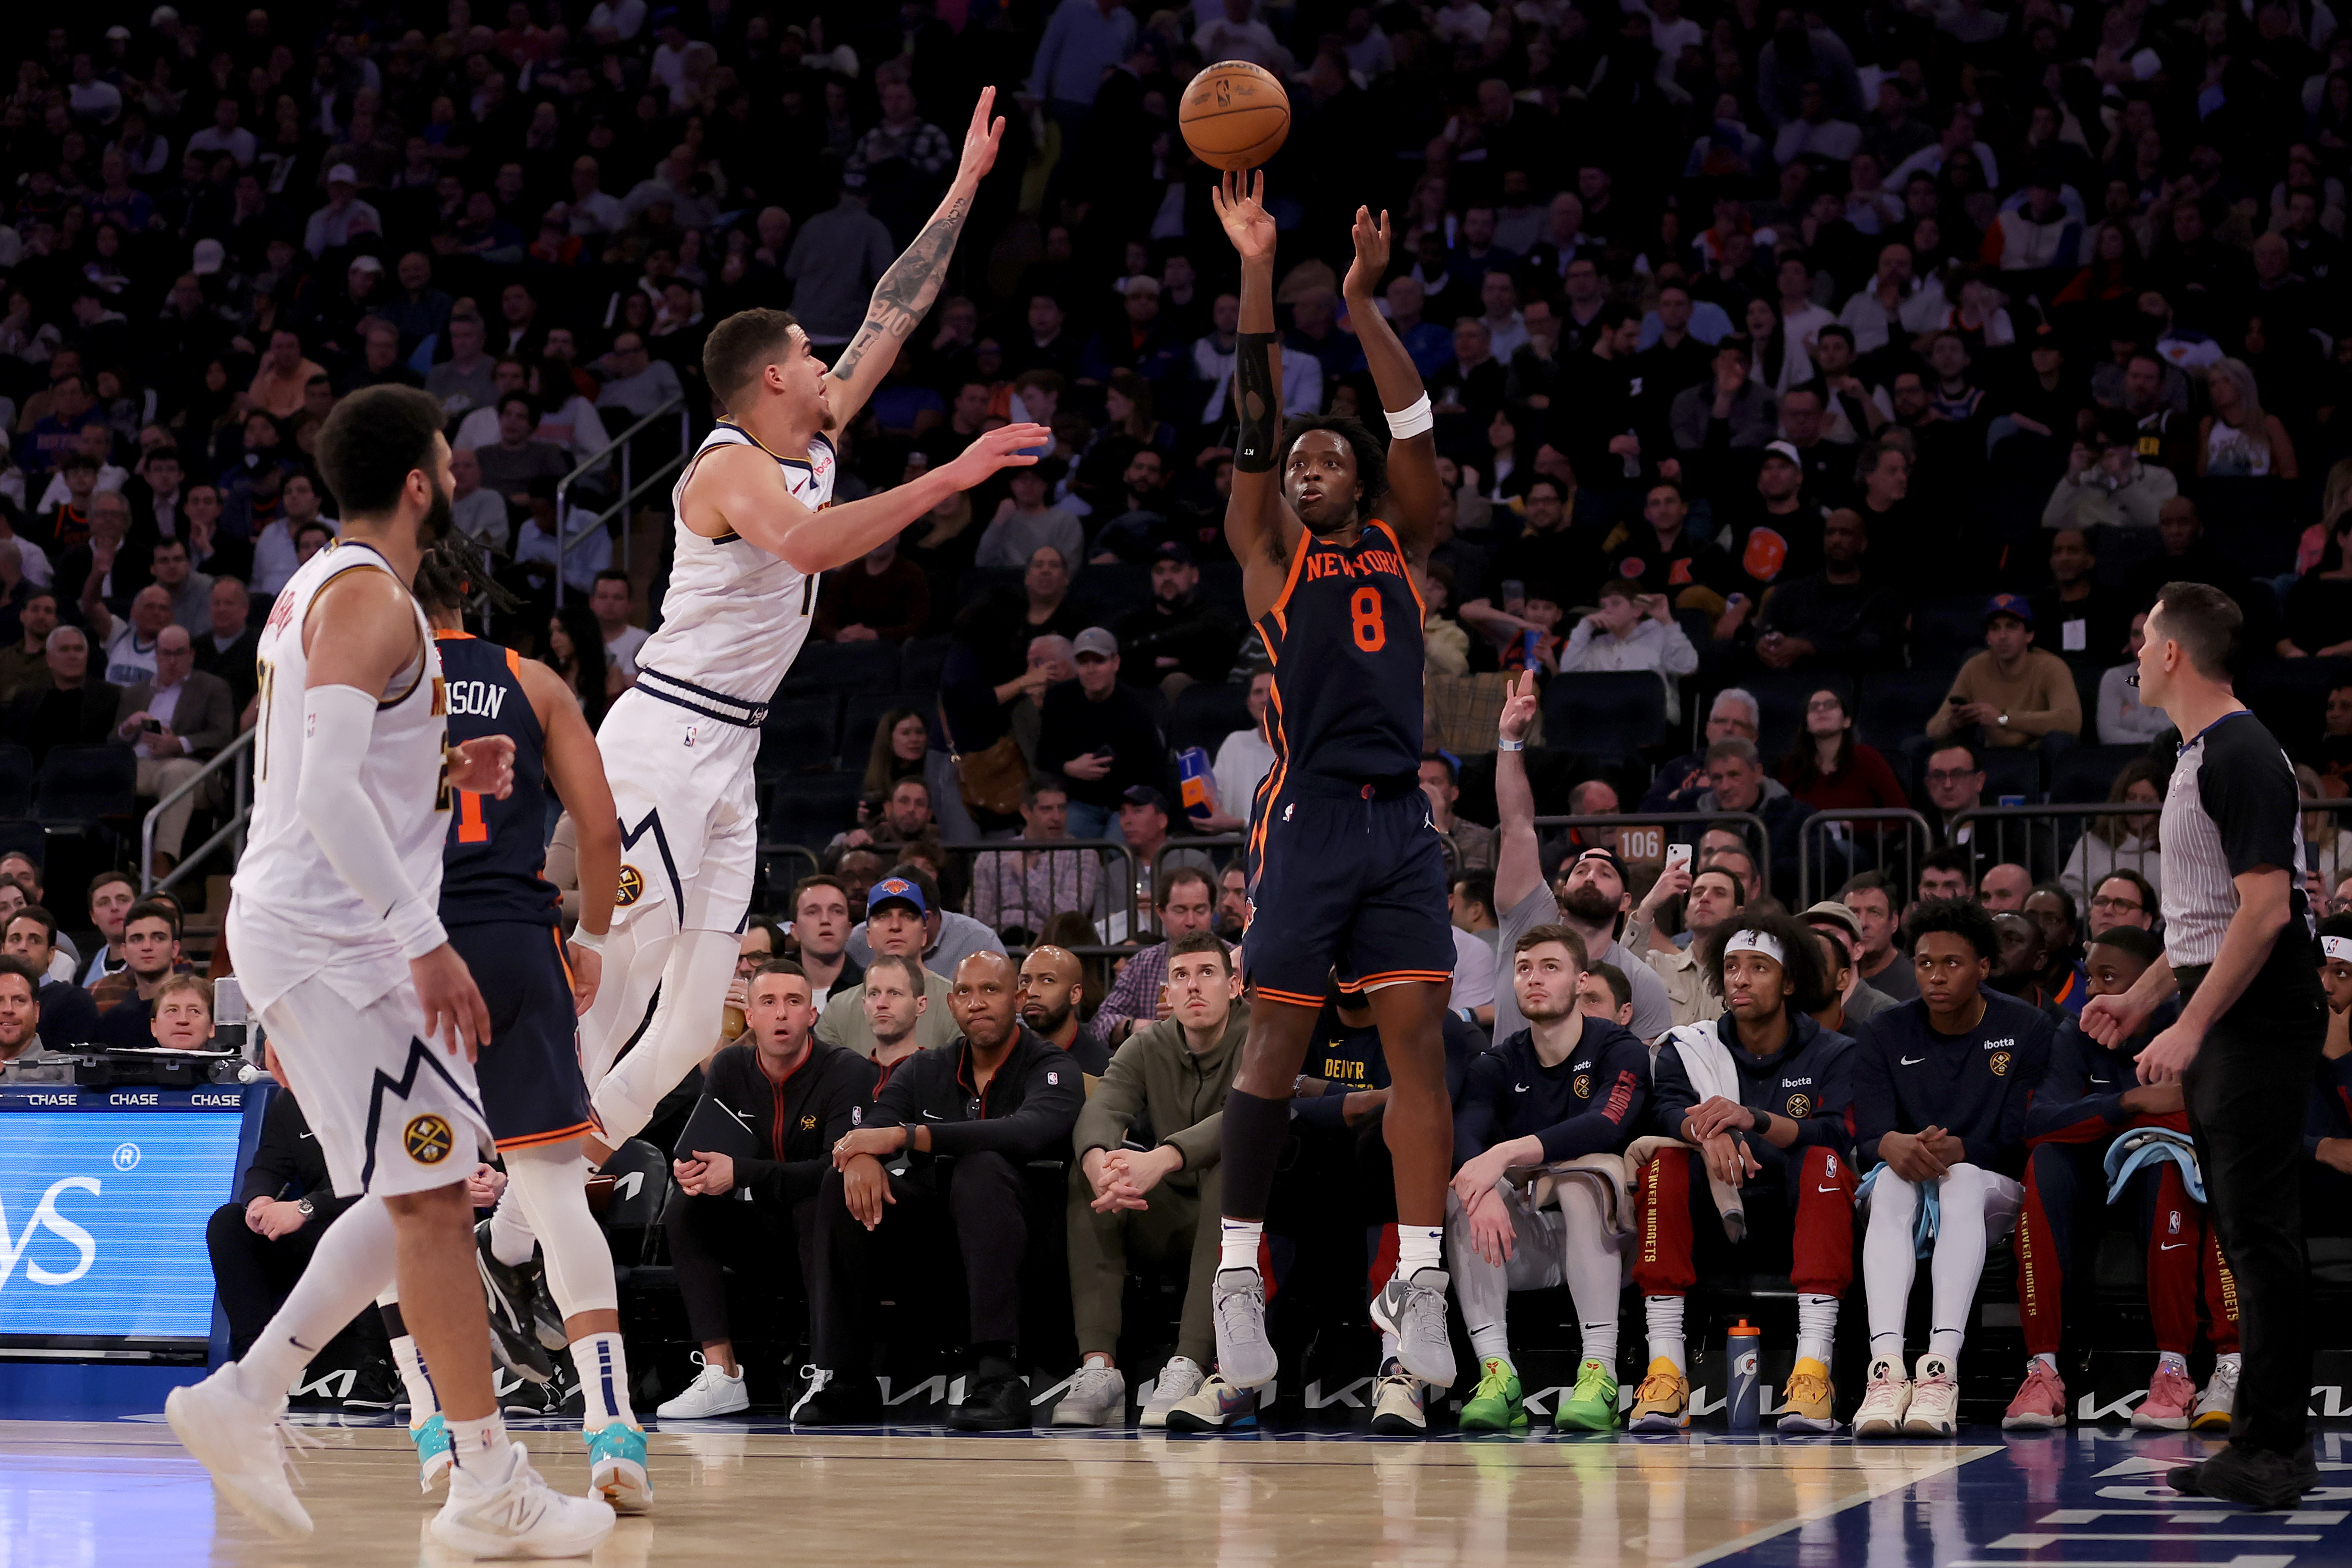 New York Knicks forward OG Anunoby (8) shoots a three point shot against Denver Nuggets forward Michael Porter Jr. (1) and Denver Nuggets guard Jamal Murray (27) during the third quarter at Madison Square Garden